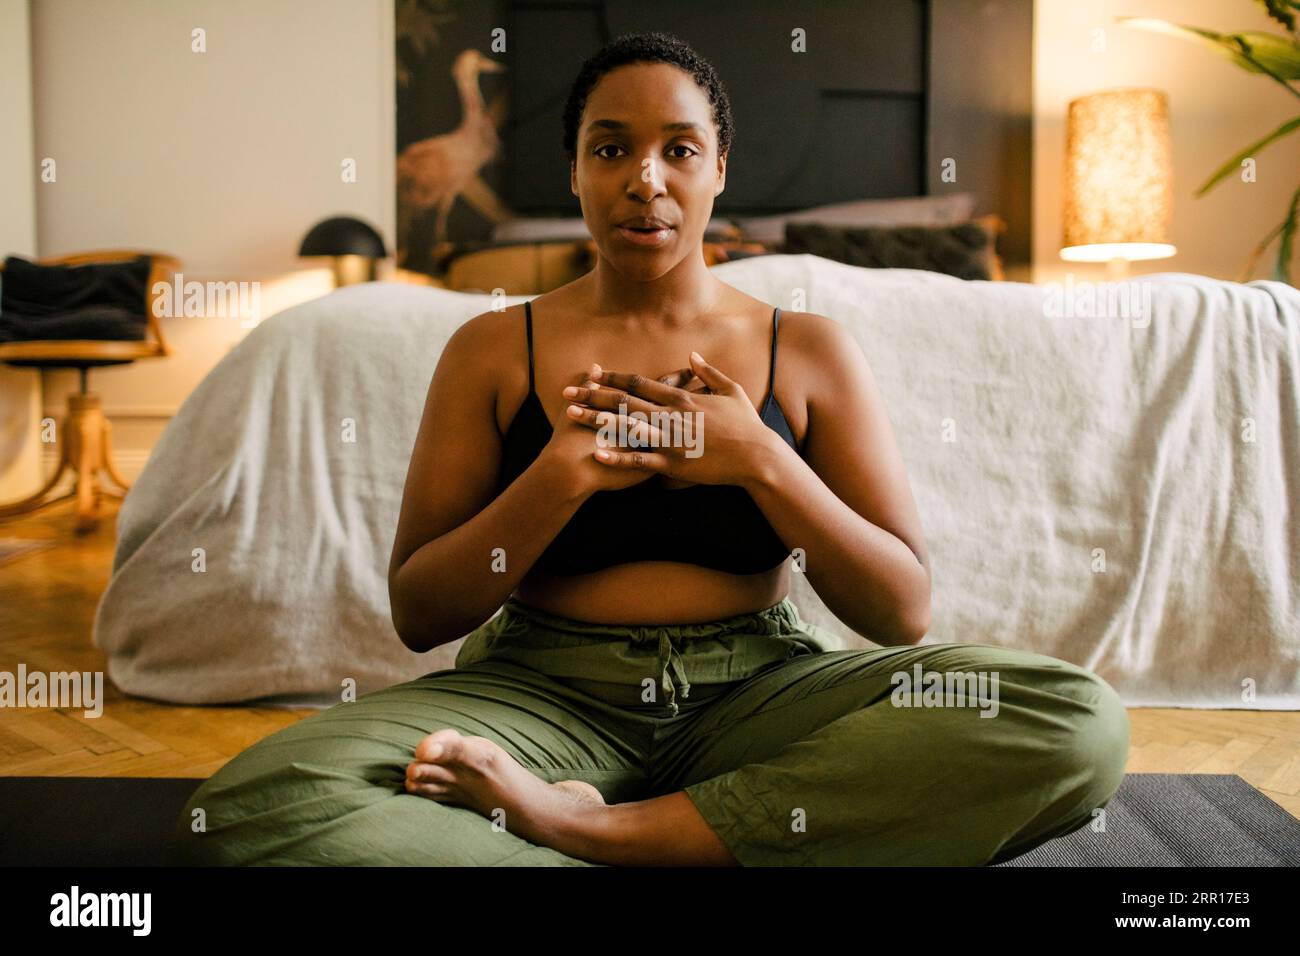 Portrait of young woman practicing breathing exercise in bedroom at home Stock Photo